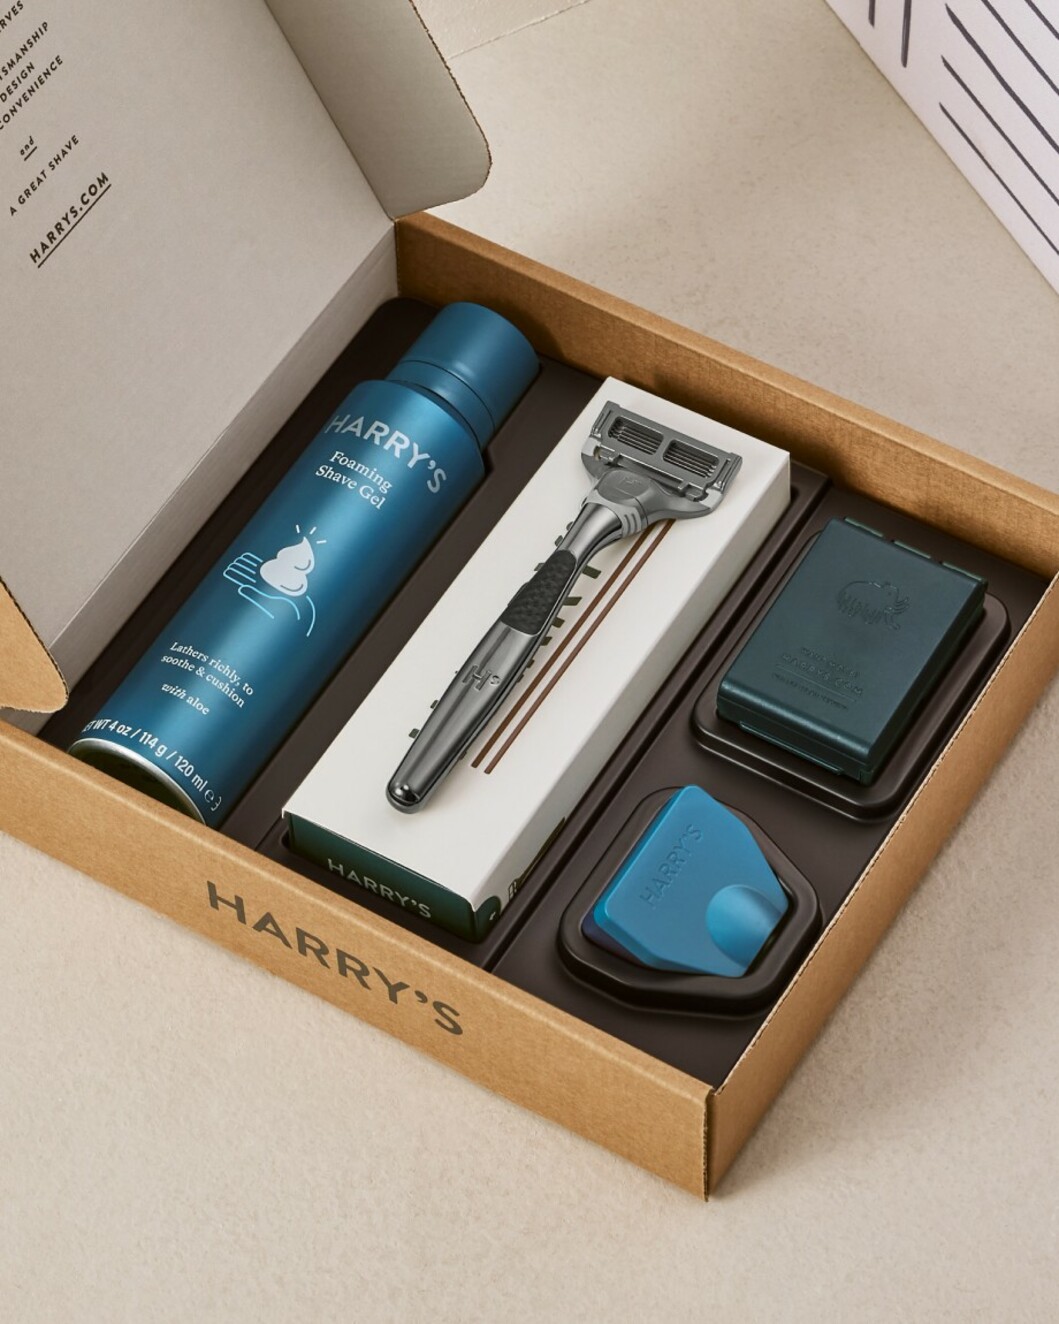 Harry's. Quality Shaving Grooming Products, at a Fair Price